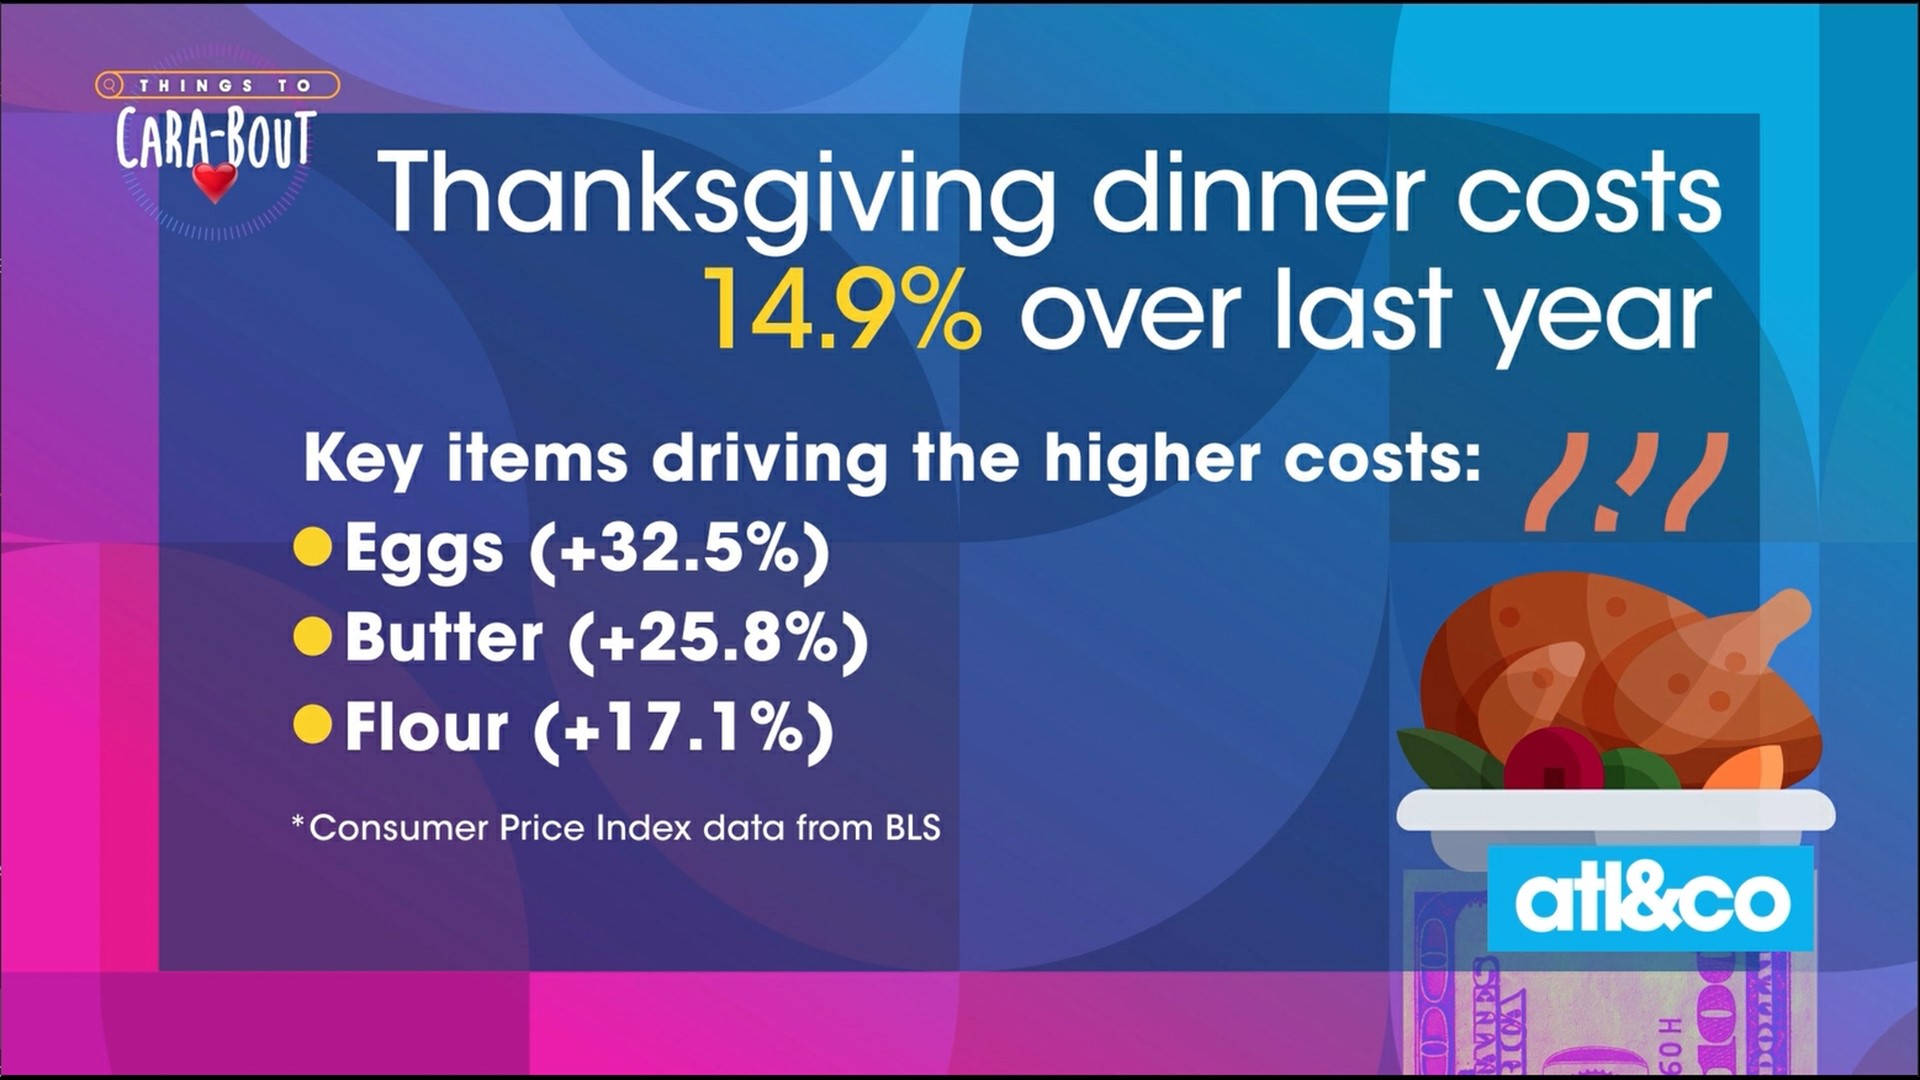 Cara Kneer shares how you can cut down on costs this Thanksgiving, in the grocery store and beyond.